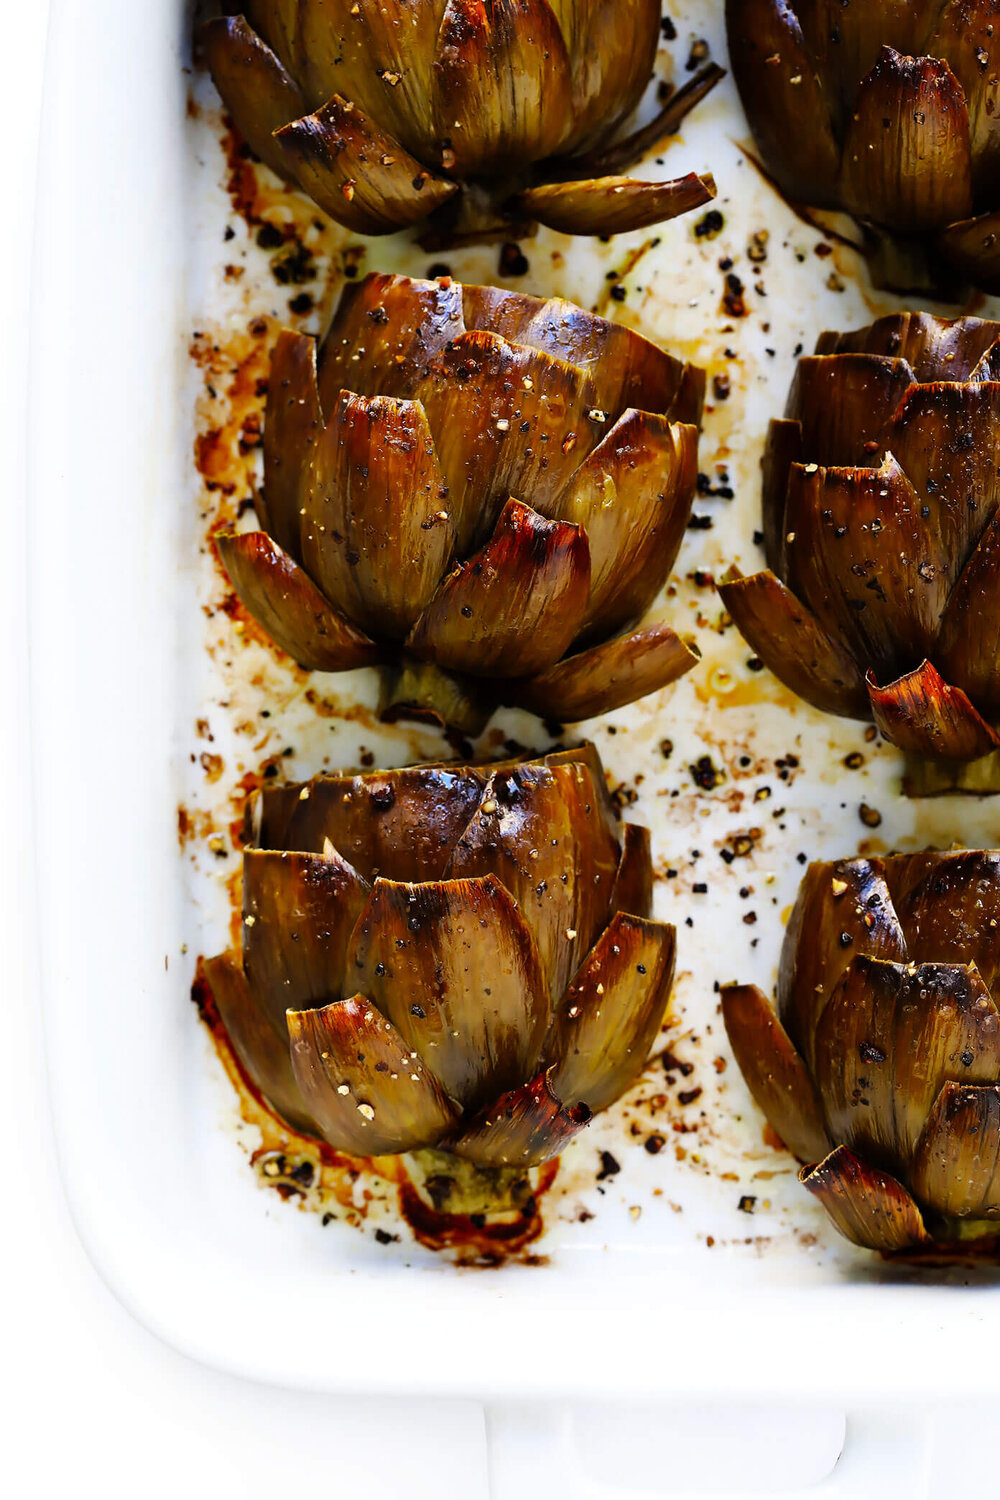 The Most Amazing Roasted Artichokes